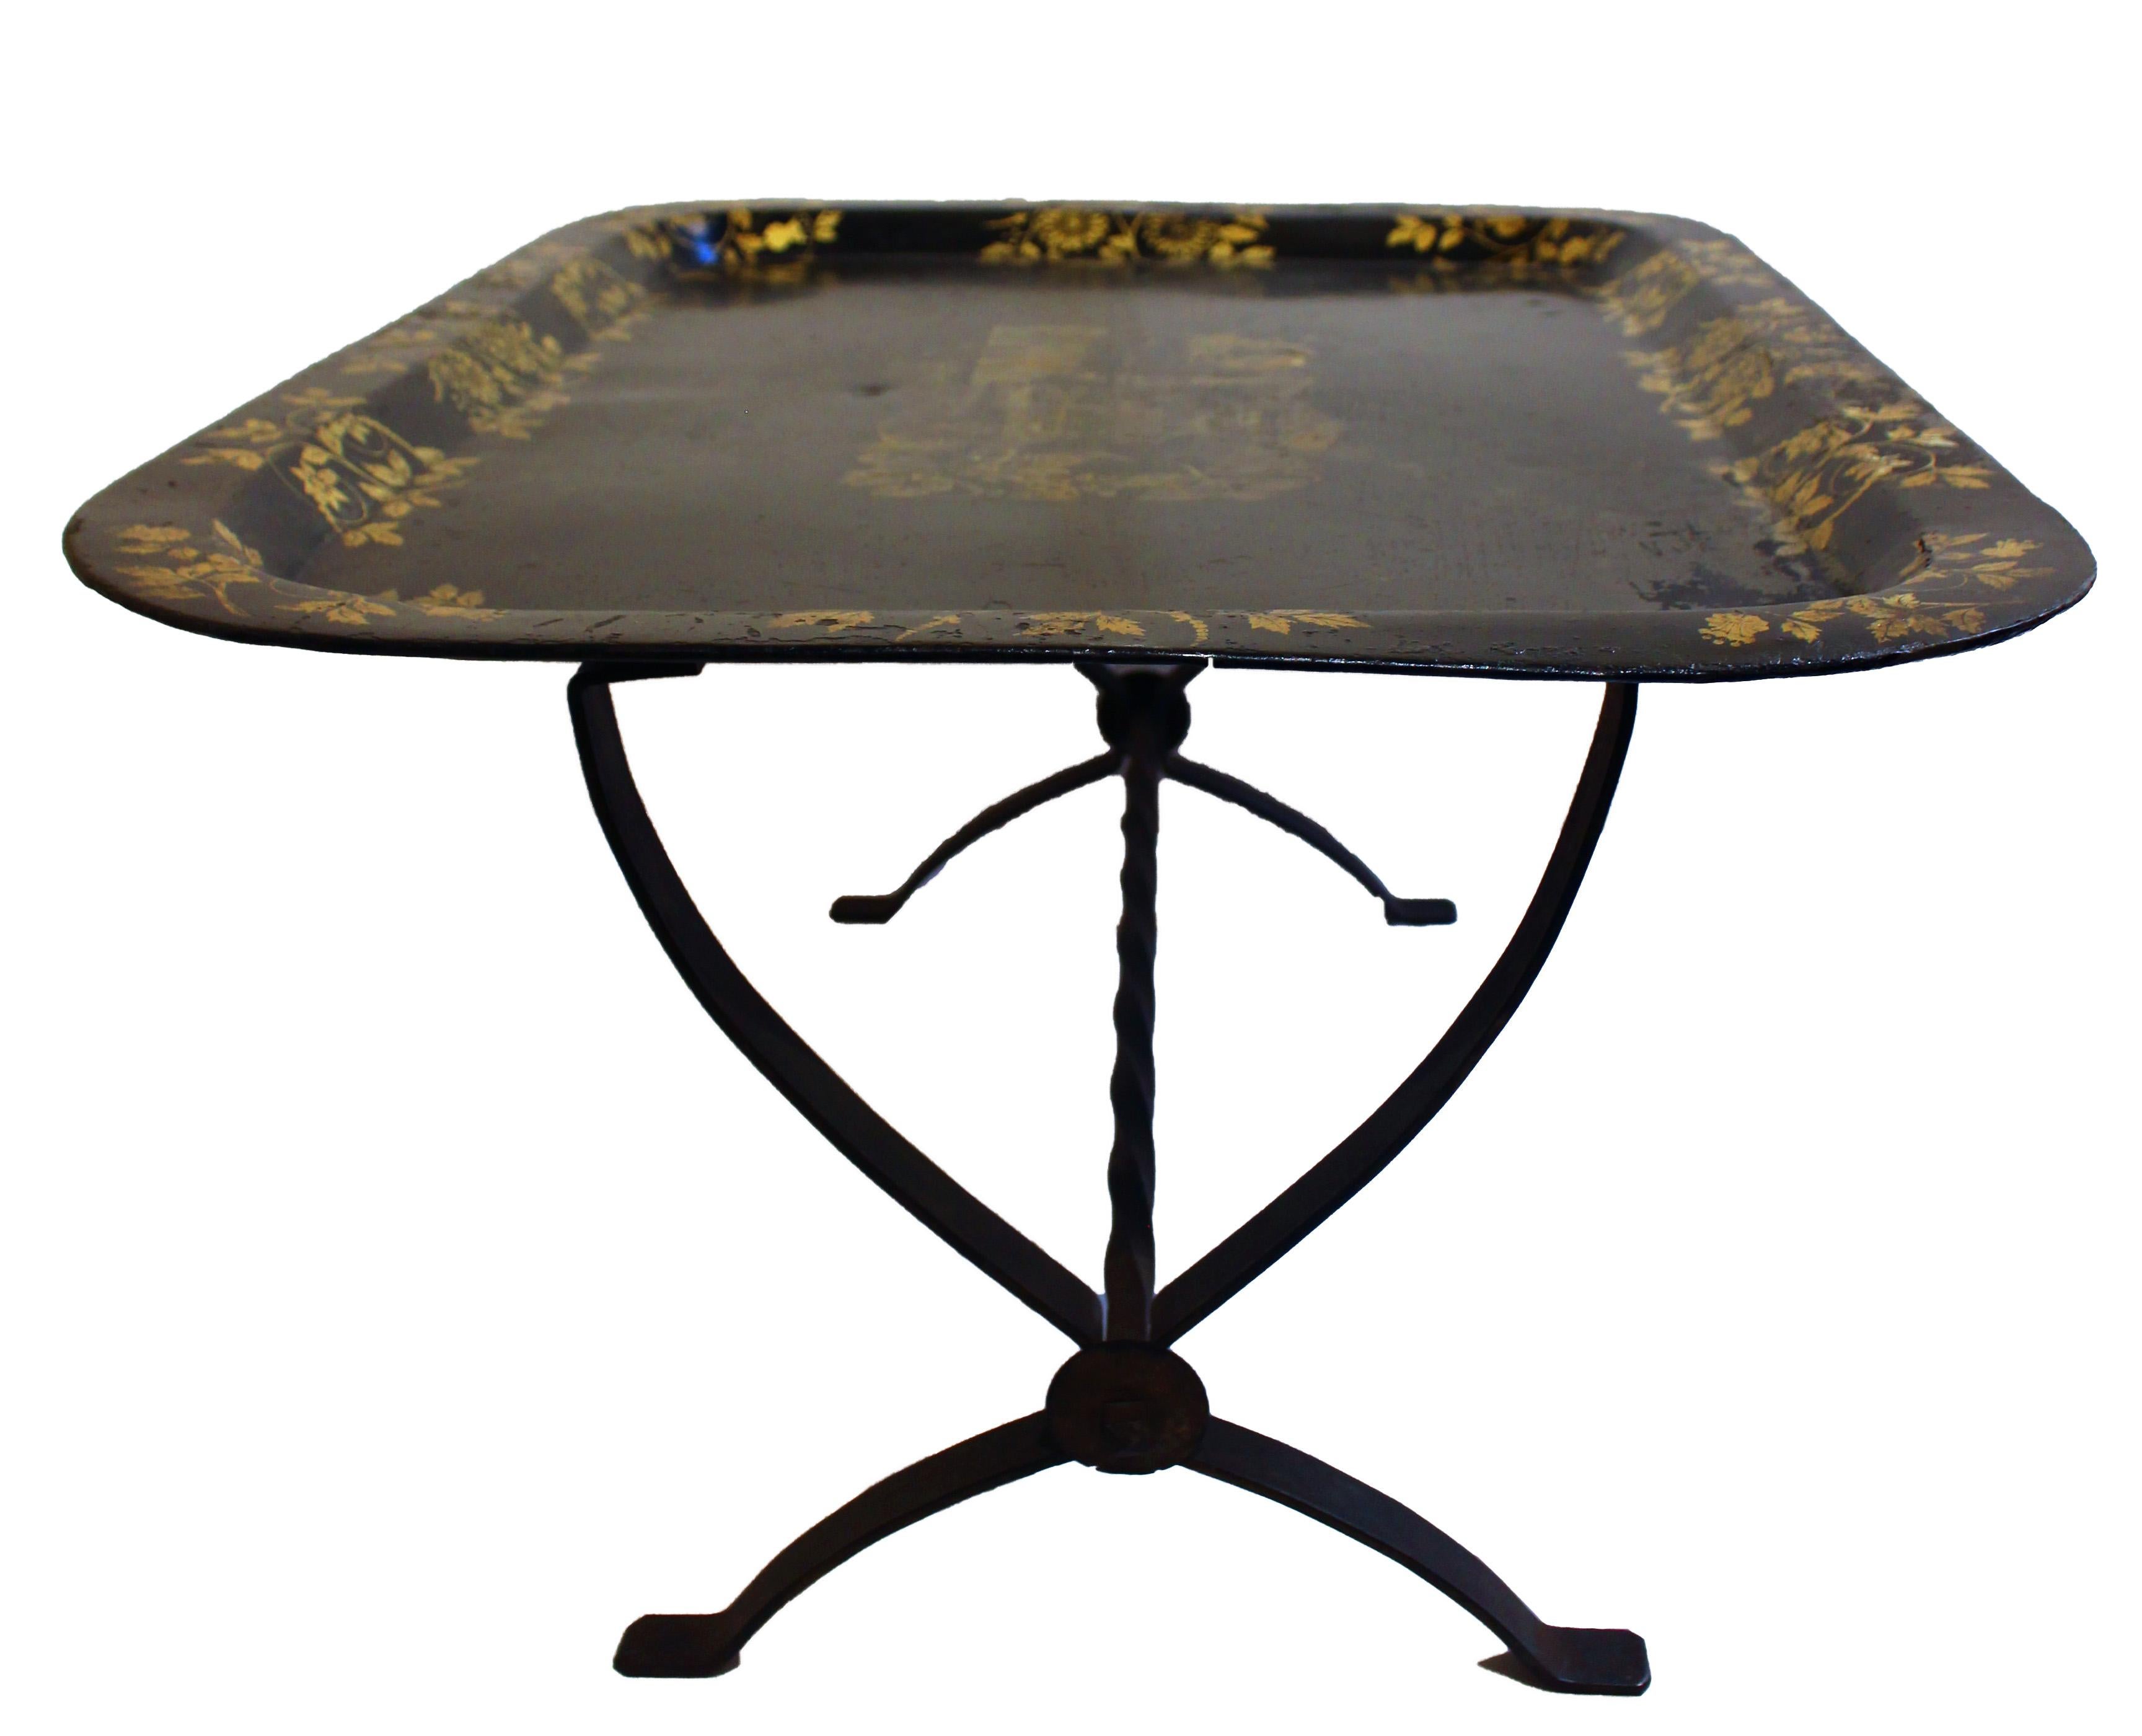 Chinoiserie Circa 1830 English Tole Tray on Steel Stand